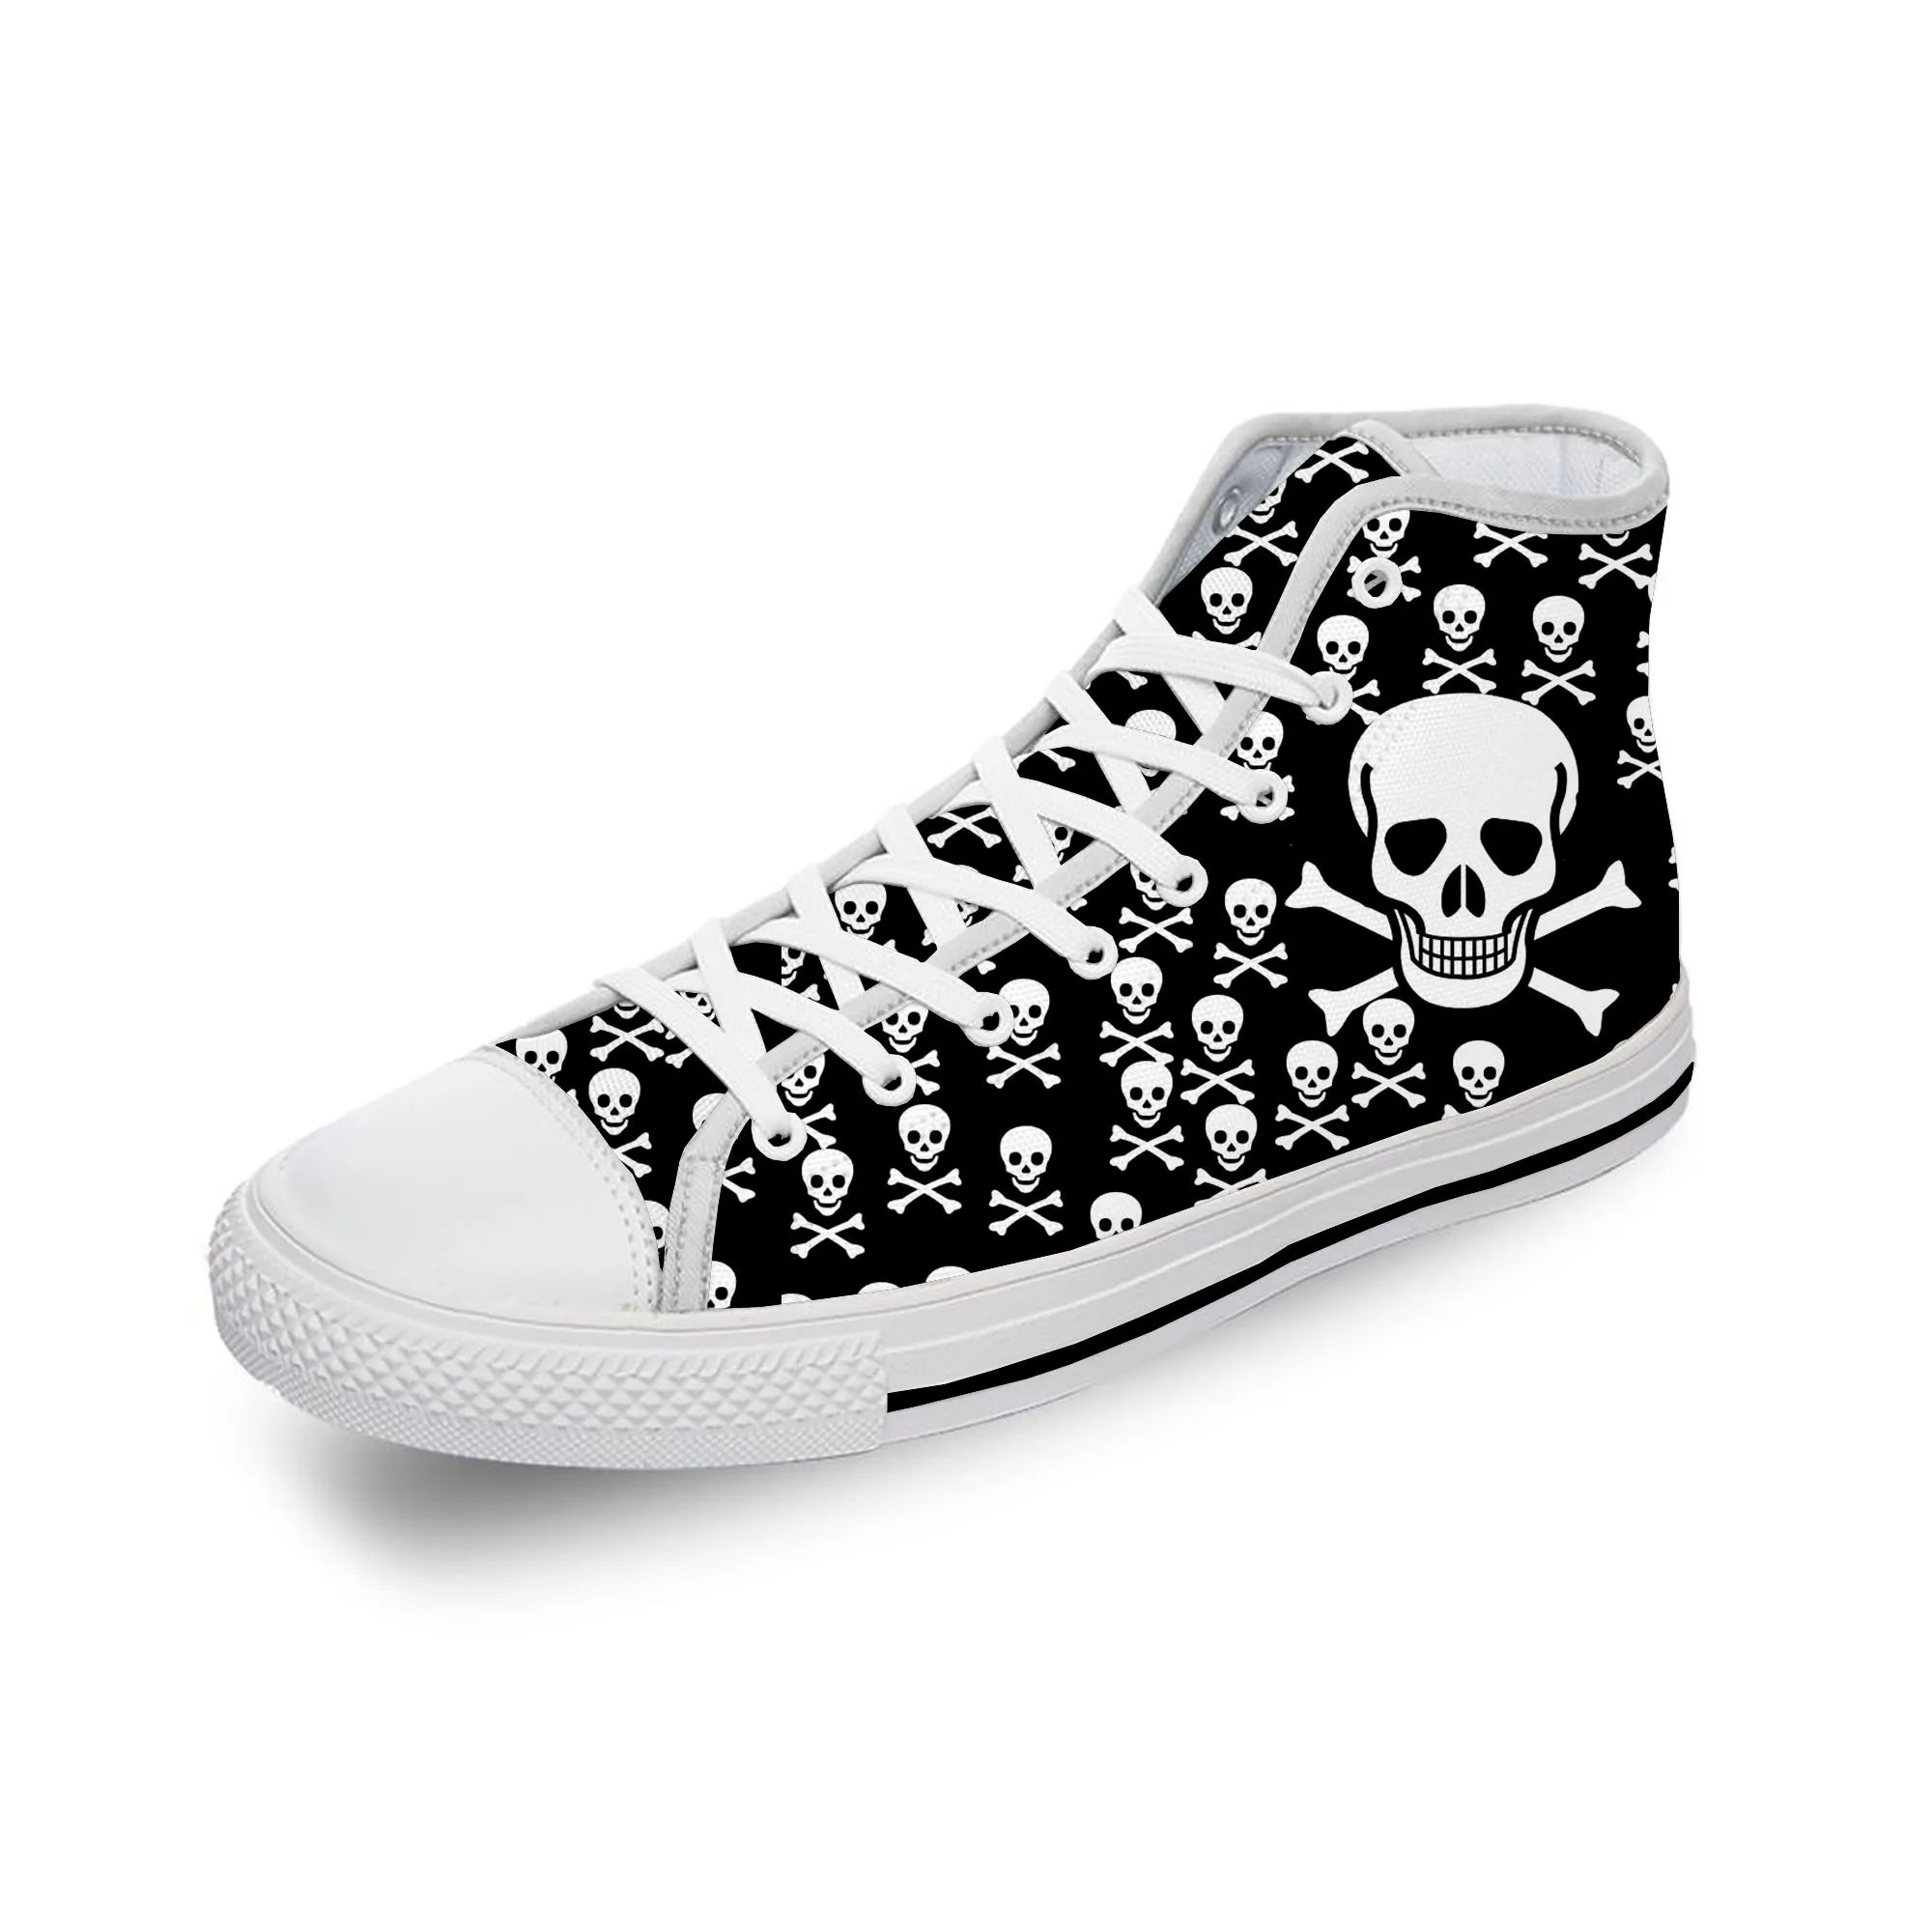 

SKull Skeleton PAisley Horror Halloween White Cloth 3D Print High Top Canvas Fashion Shoes Men Women Breathable Sneakers